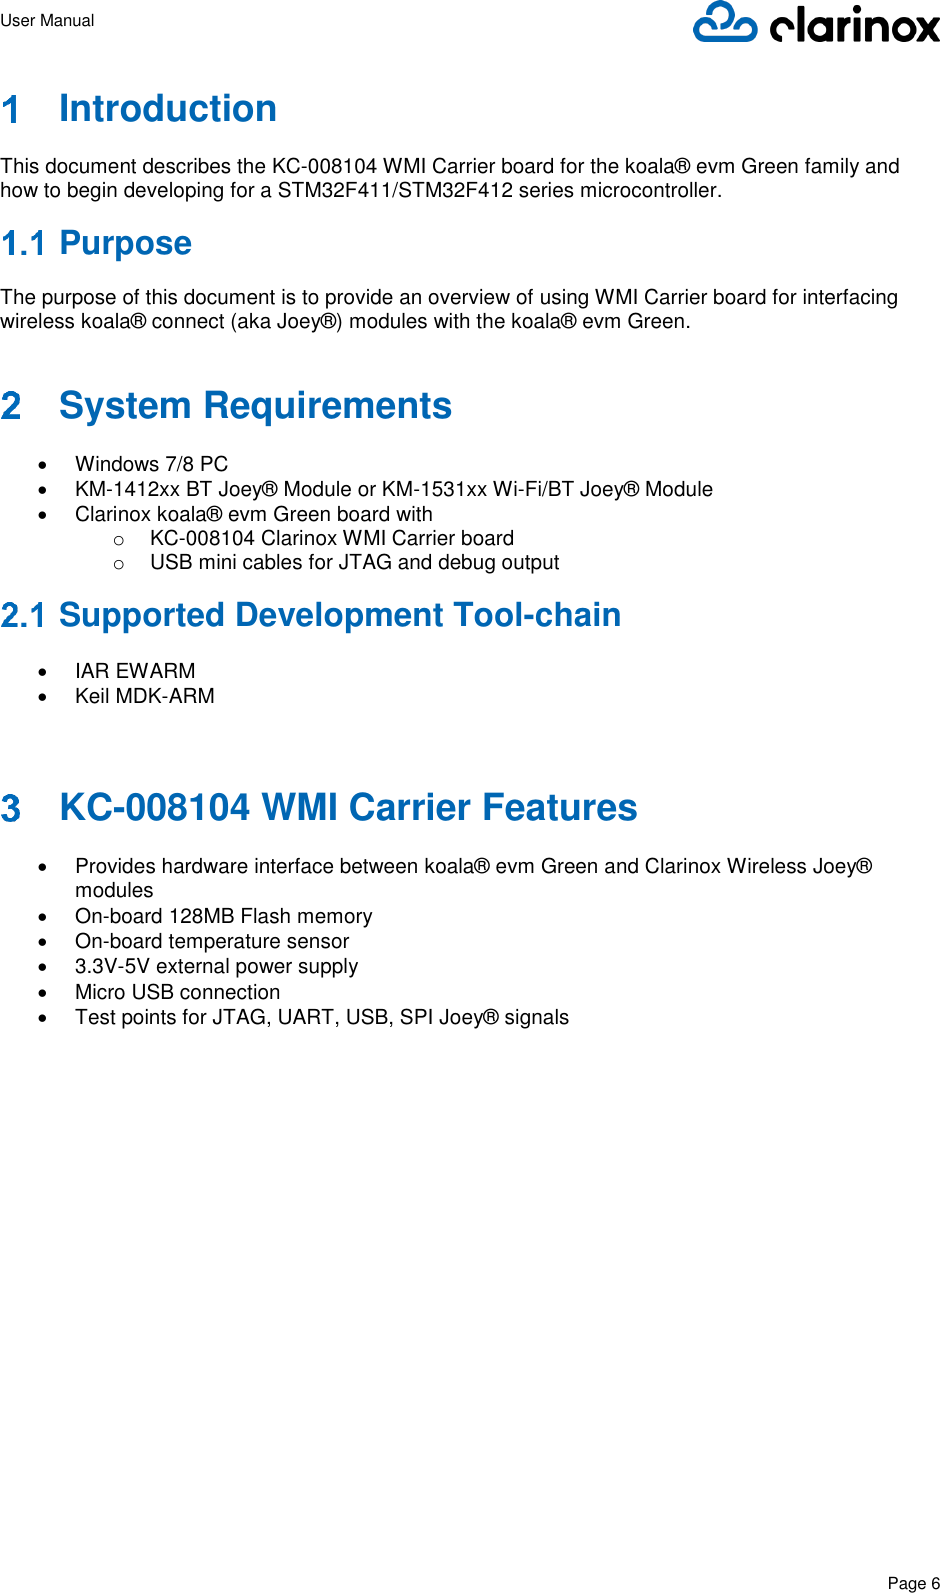 User Manual      Page 6    Introduction  This document describes the KC-008104 WMI Carrier board for the koala® evm Green family and how to begin developing for a STM32F411/STM32F412 series microcontroller.   Purpose  The purpose of this document is to provide an overview of using WMI Carrier board for interfacing wireless koala® connect (aka Joey®) modules with the koala® evm Green.   System Requirements  •  Windows 7/8 PC • KM-1412xx BT Joey® Module or KM-1531xx Wi-Fi/BT Joey® Module •  Clarinox koala® evm Green board with o KC-008104 Clarinox WMI Carrier board o  USB mini cables for JTAG and debug output  Supported Development Tool-chain  •  IAR EWARM •  Keil MDK-ARM   KC-008104 WMI Carrier Features  •  Provides hardware interface between koala® evm Green and Clarinox Wireless Joey® modules • On-board 128MB Flash memory • On-board temperature sensor • 3.3V-5V external power supply •  Micro USB connection •  Test points for JTAG, UART, USB, SPI Joey® signals                      